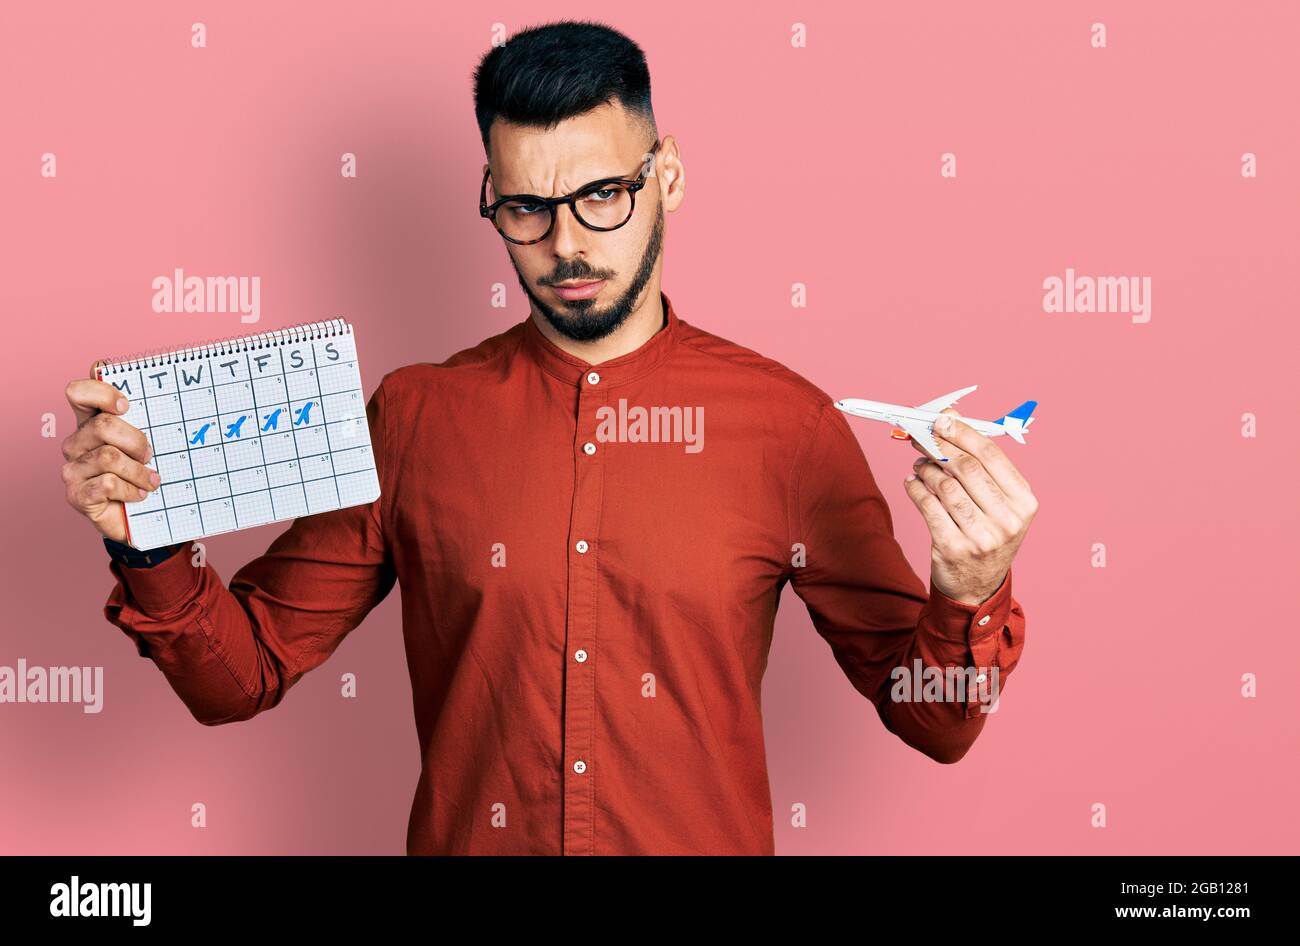 Young hispanic man with beard holding plane toy and travel calendar skeptic and nervous, frowning upset because of problem. negative person. Stock Photo